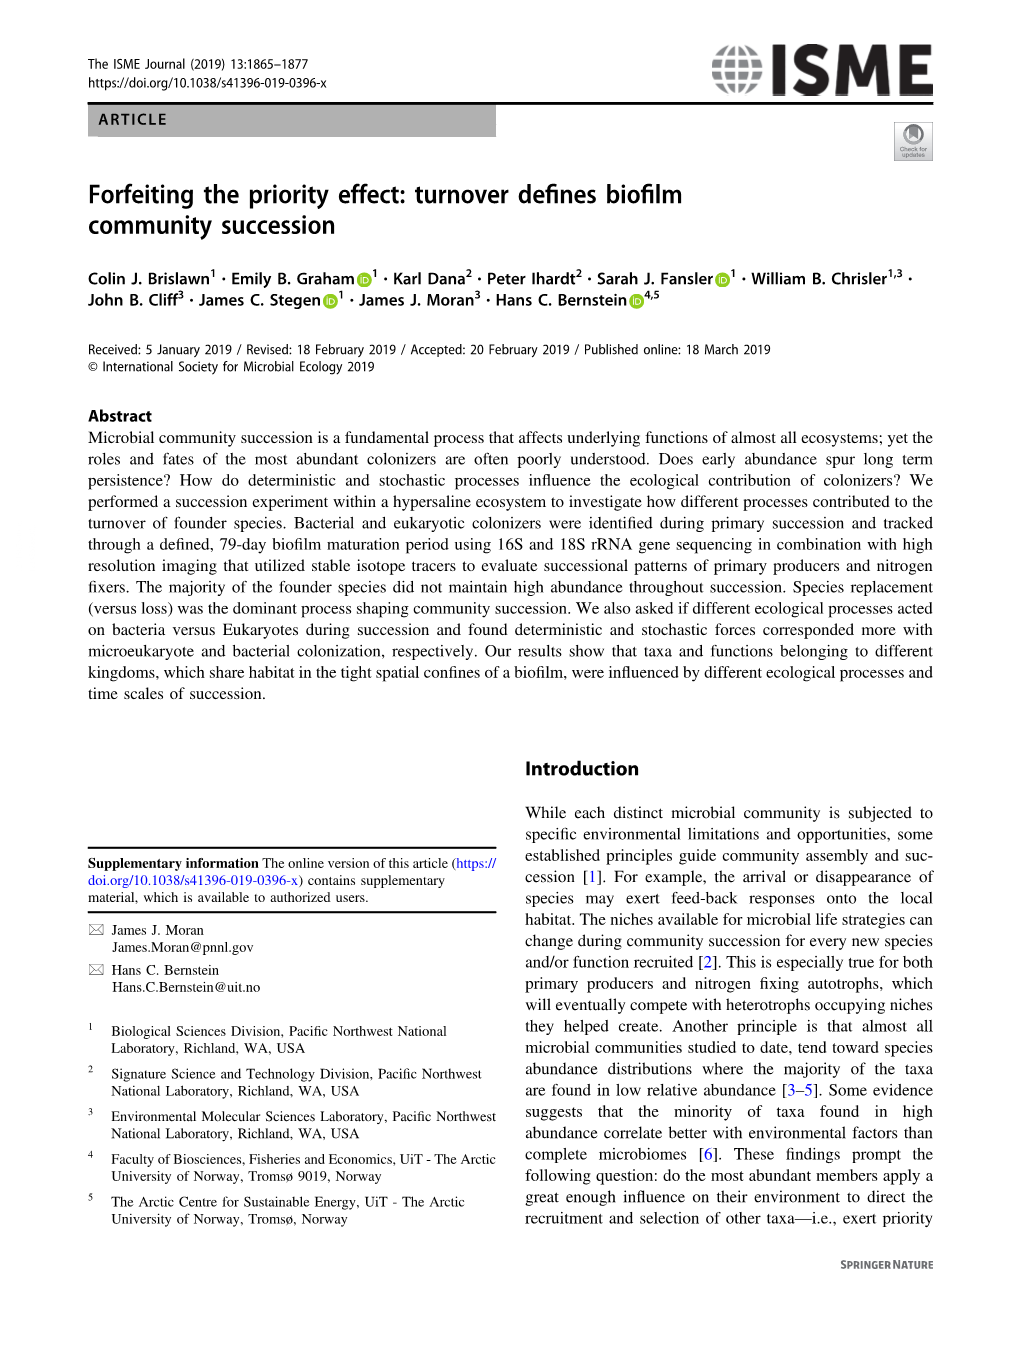 Forfeiting the Priority Effect: Turnover Defines Biofilm Community Succession